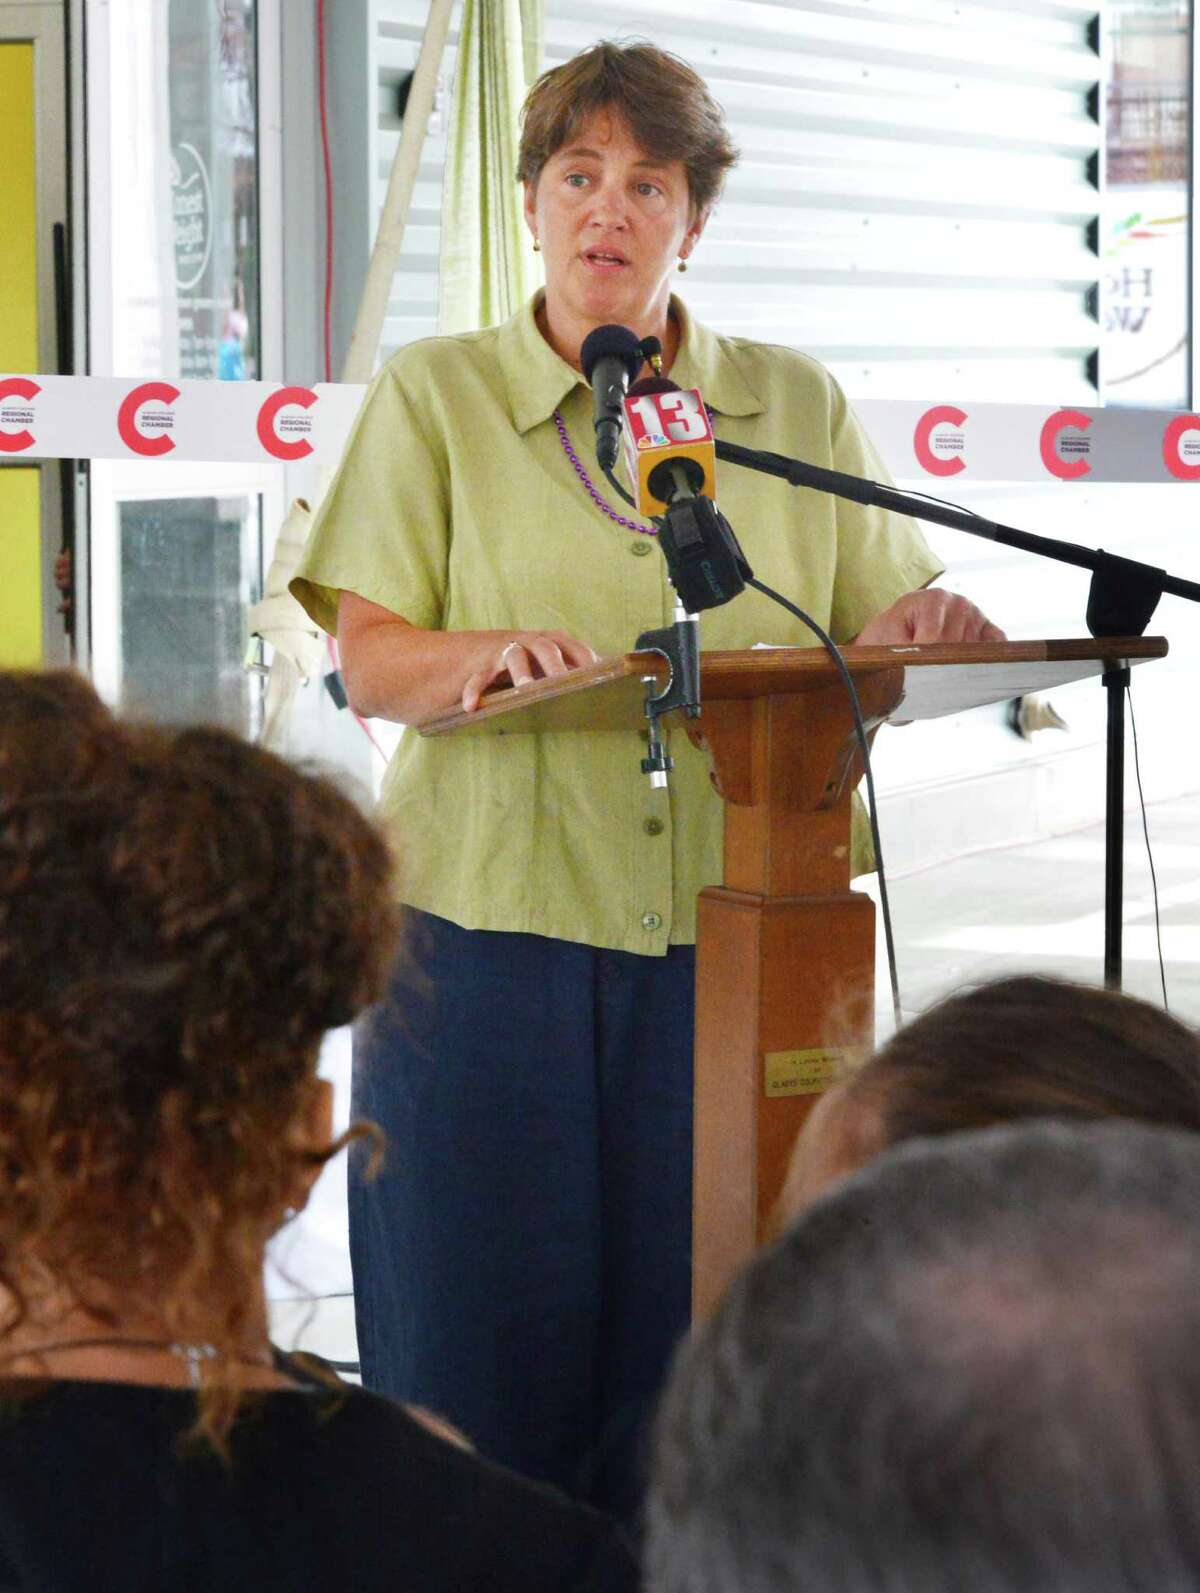 HWFC board president Lynne Lekakis speaks during grand opening ceremonies for Honest Weight Co-Op's new store on Watervliet Ave. Thursday Aug. 8, 2013, in Albany, NY. (John Carl D'Annibale / Times Union)